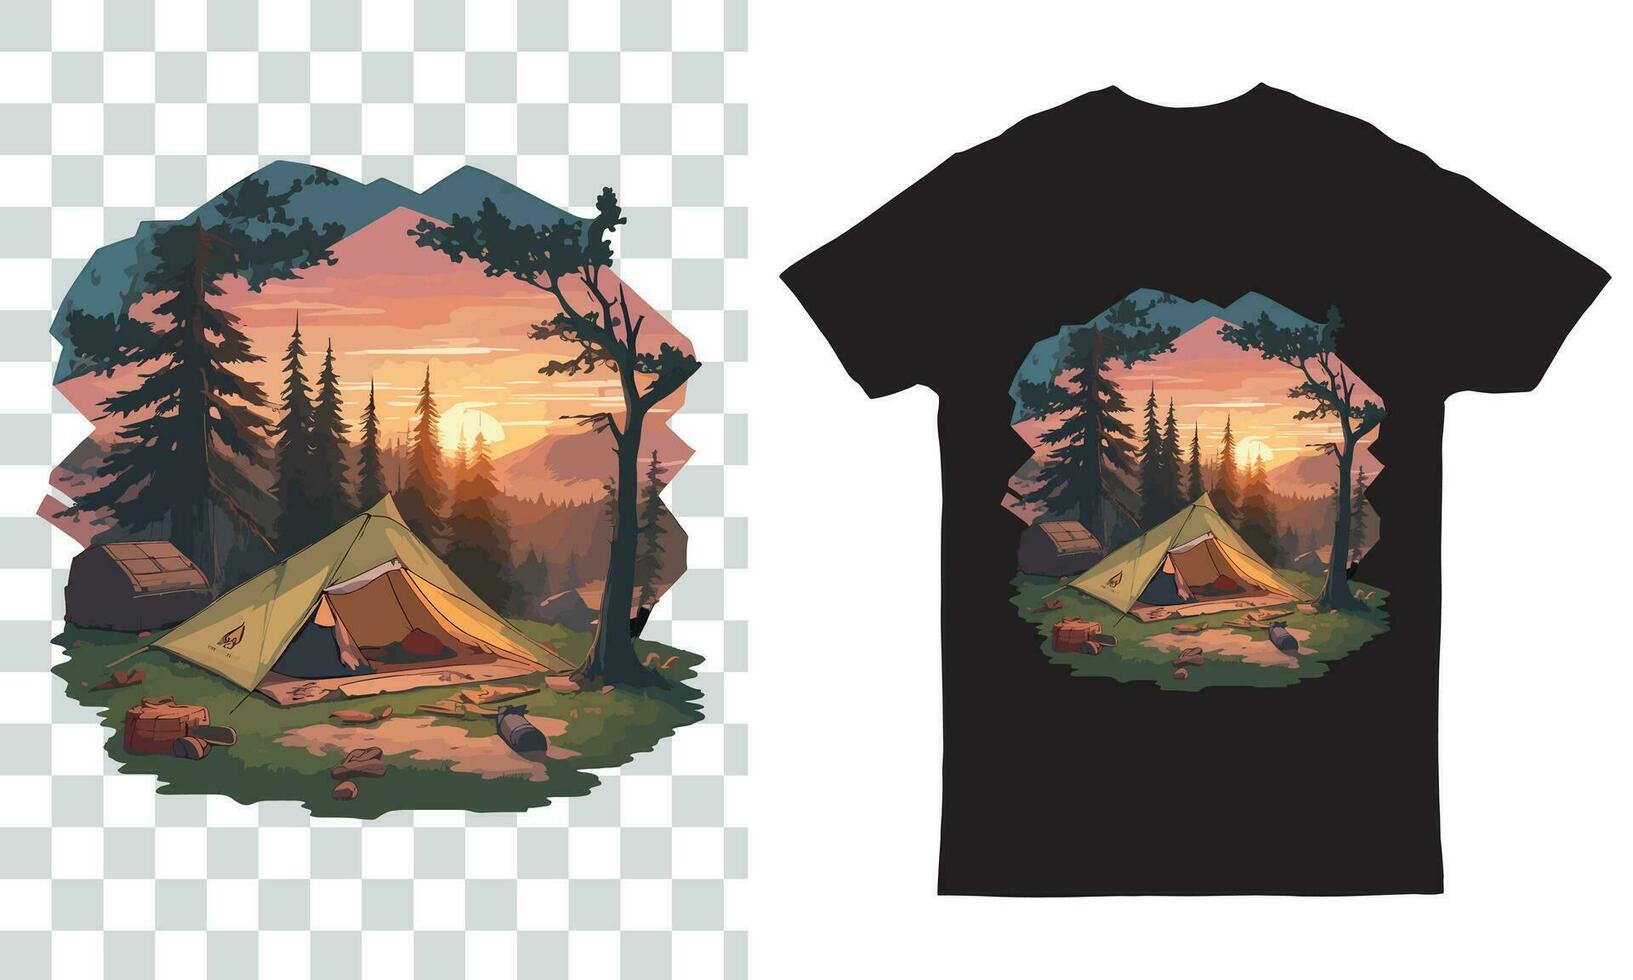 Arts work of T- shirt design, a ripped tent, spruces, sunset, axe laying on ground vector